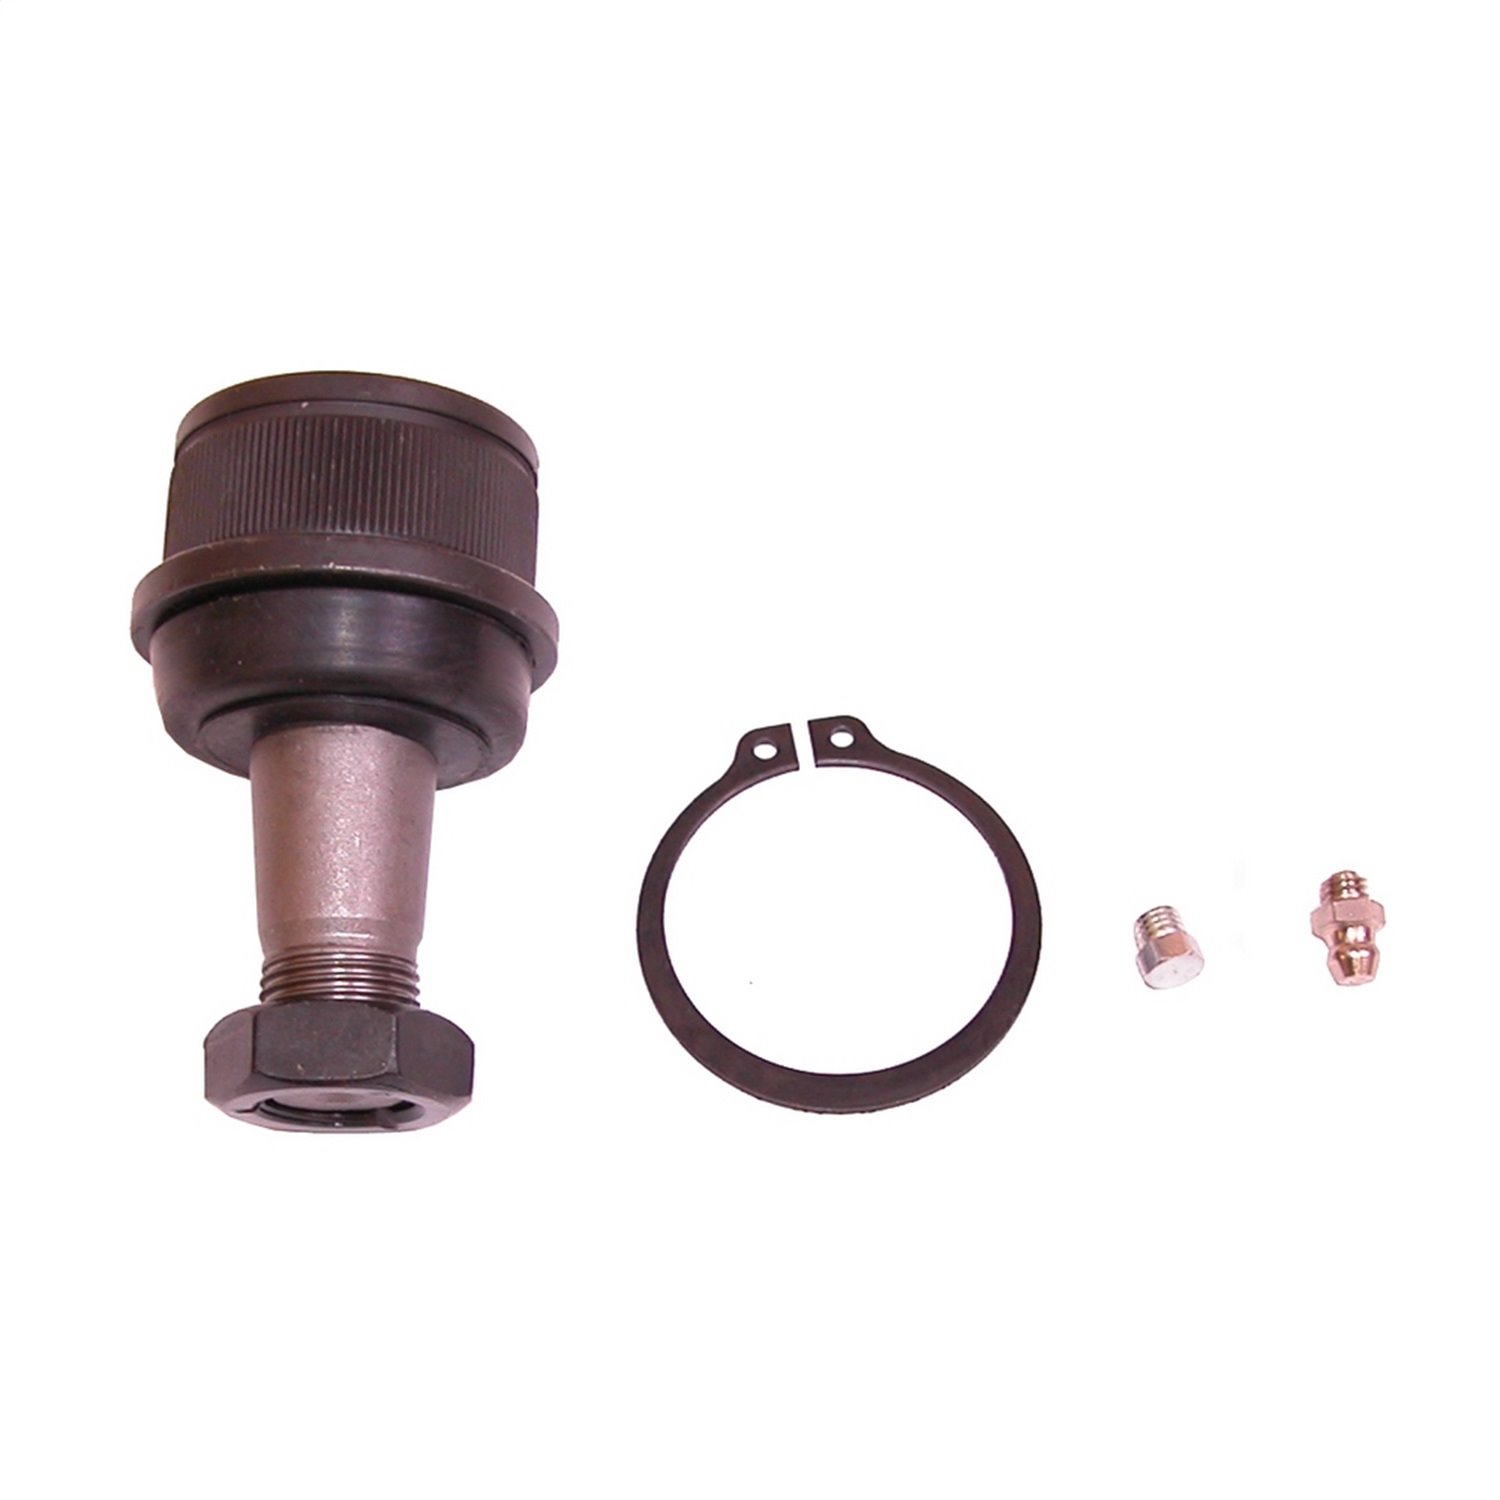 This lower Ball Joint kit from Omix-ADA fits 72-86 Jeep CJ models. It includes one lower Ball Joint and the associated hardware.